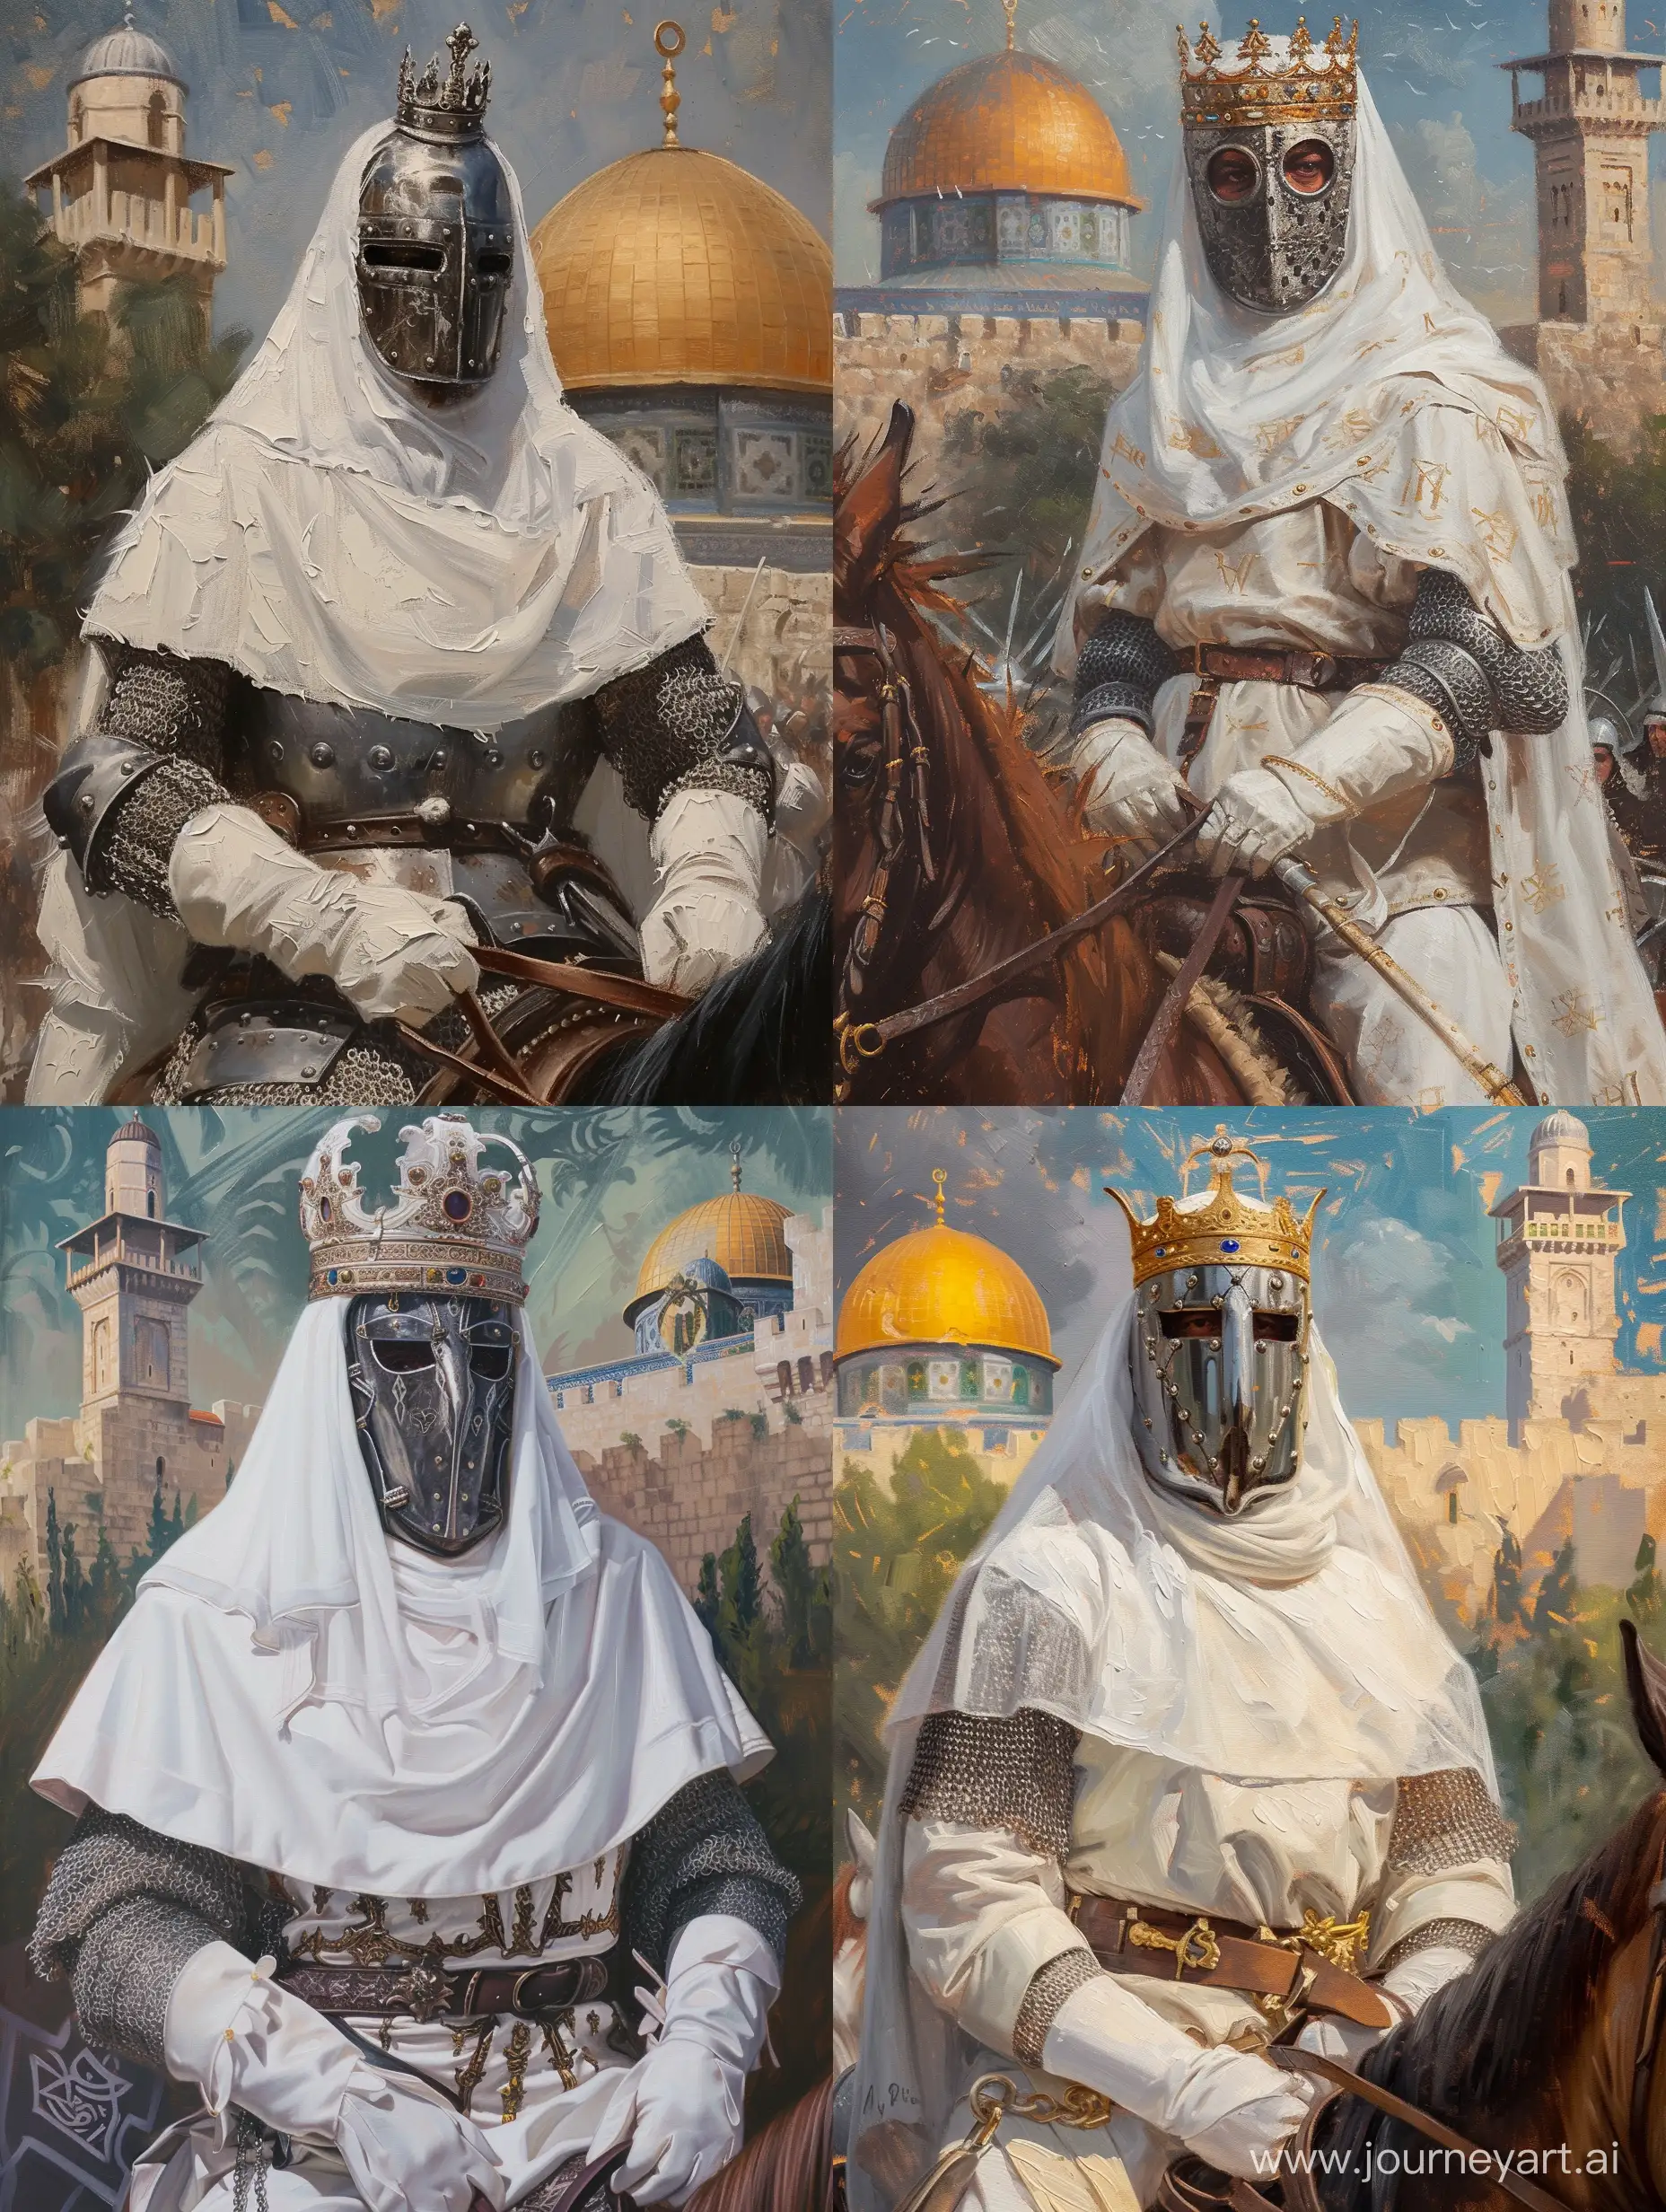 King Baldwin IV of Jerusalem. He is wearing white tabard over chainmail. Full face covering iron mask. White veil and king crown. White silk gloves. He is on his horse. Jerusalem themed background. Oil painting. Brush strikes.